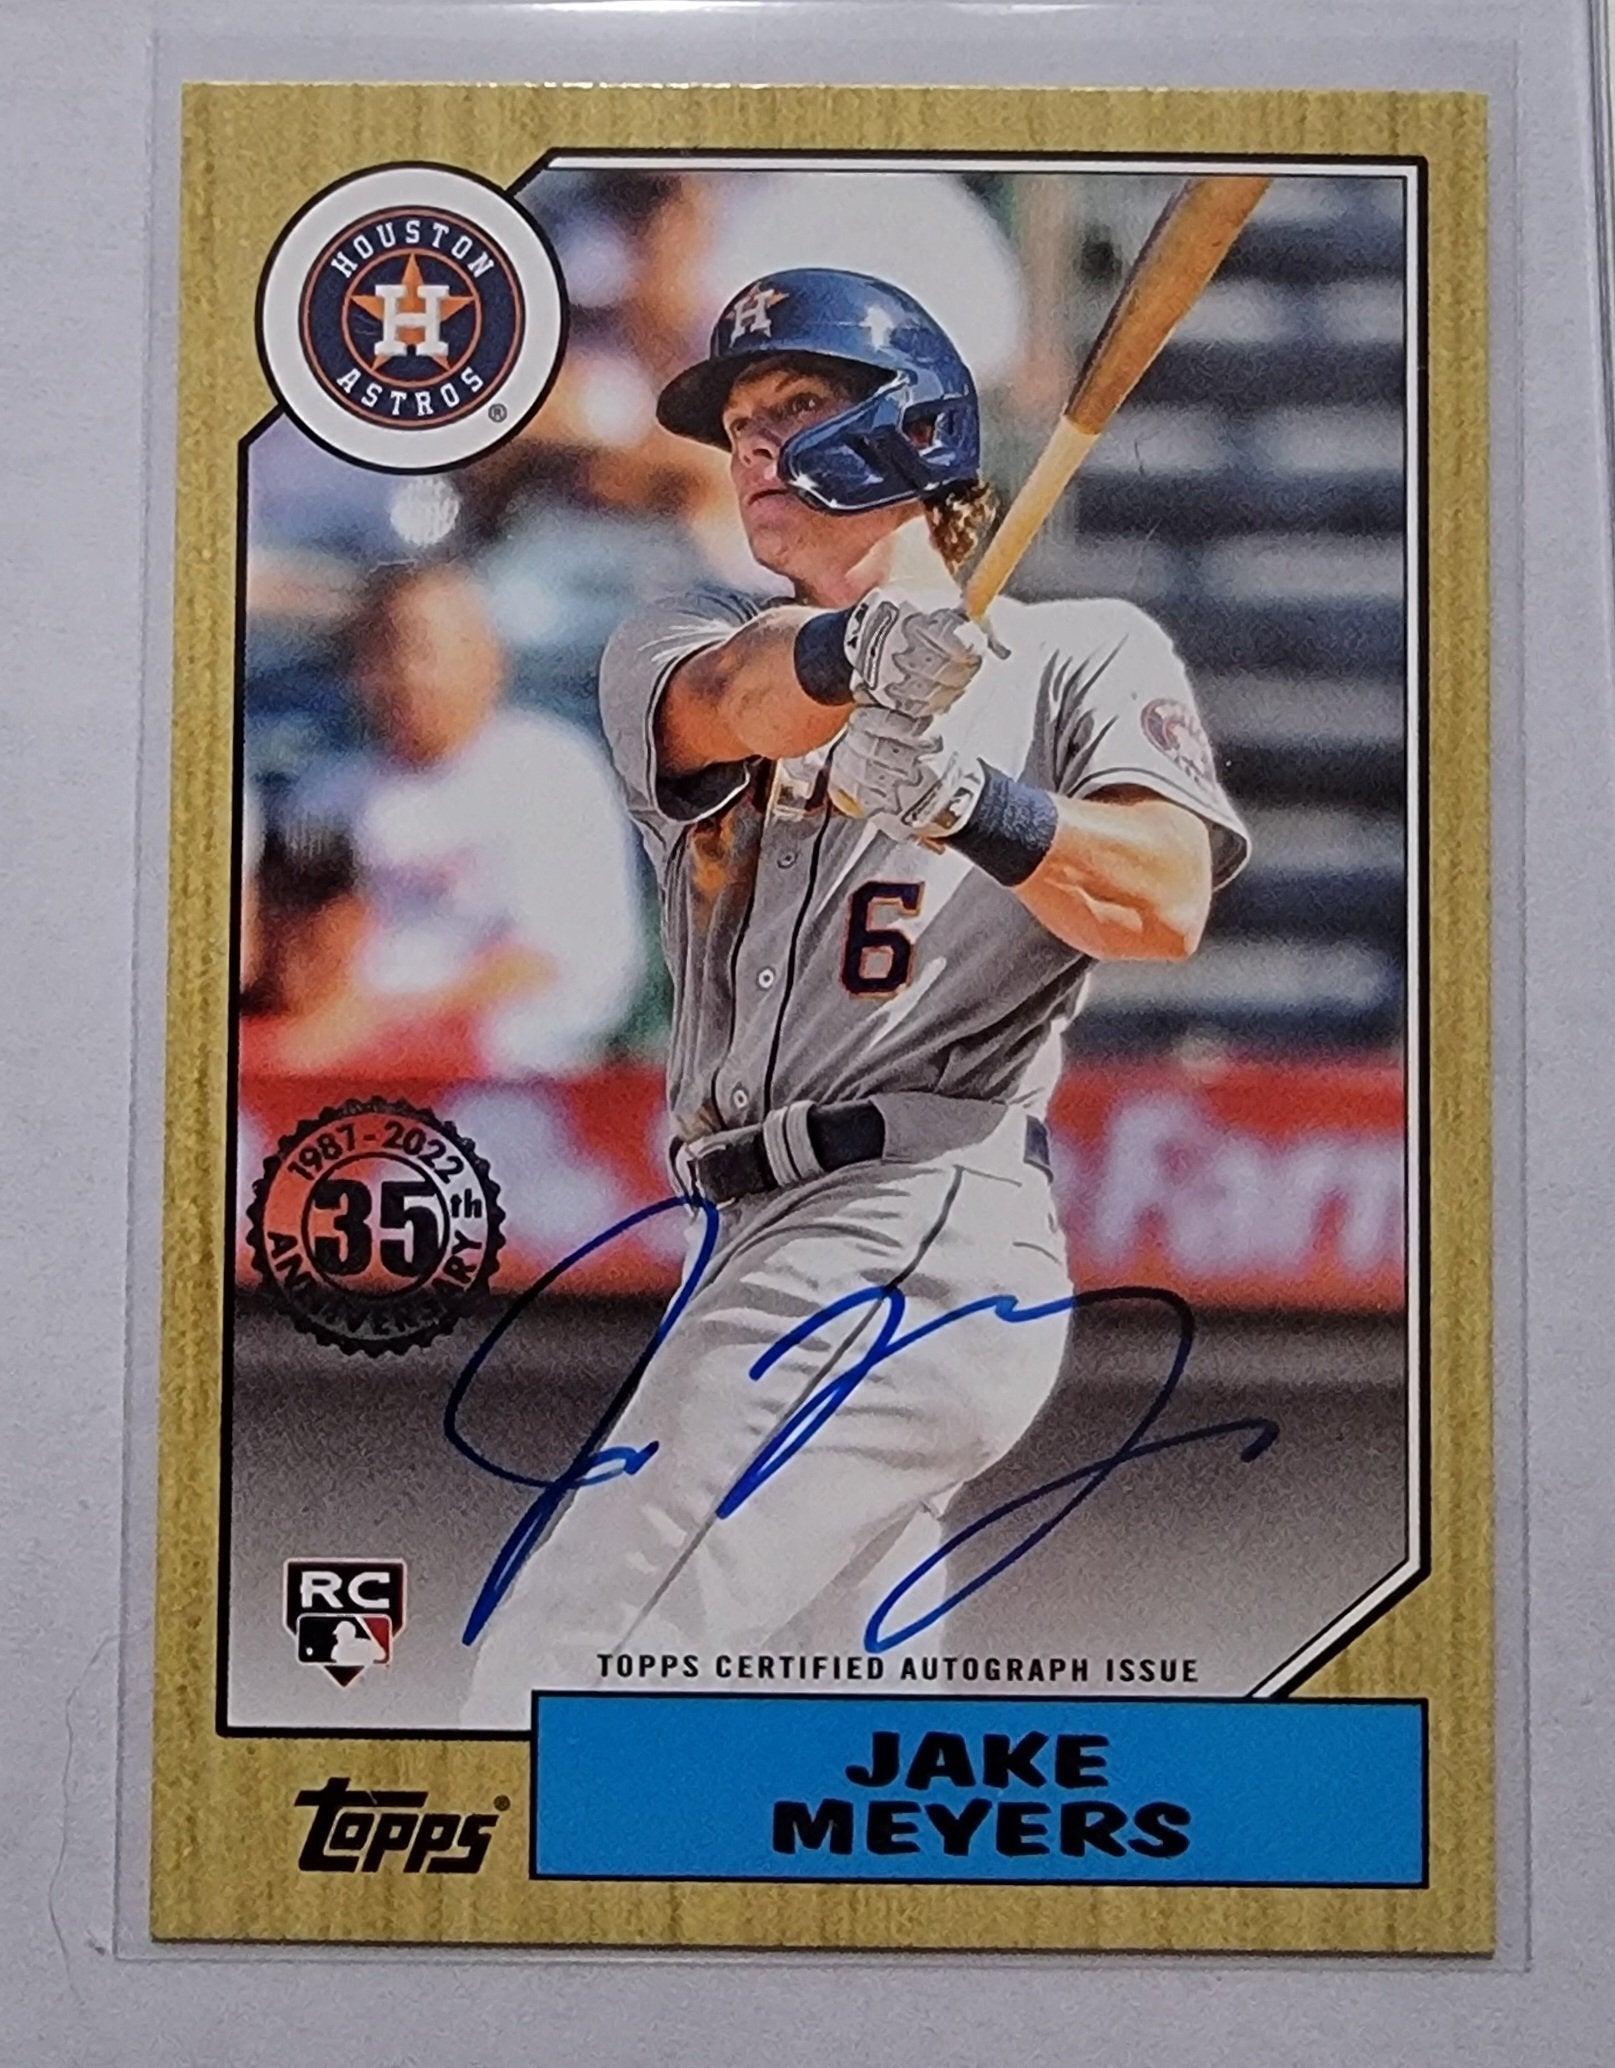 2022 Topps Jake Meyers 1987 35th Anniversary Autographed Rookie Baseball Card AVM1 simple Xclusive Collectibles   